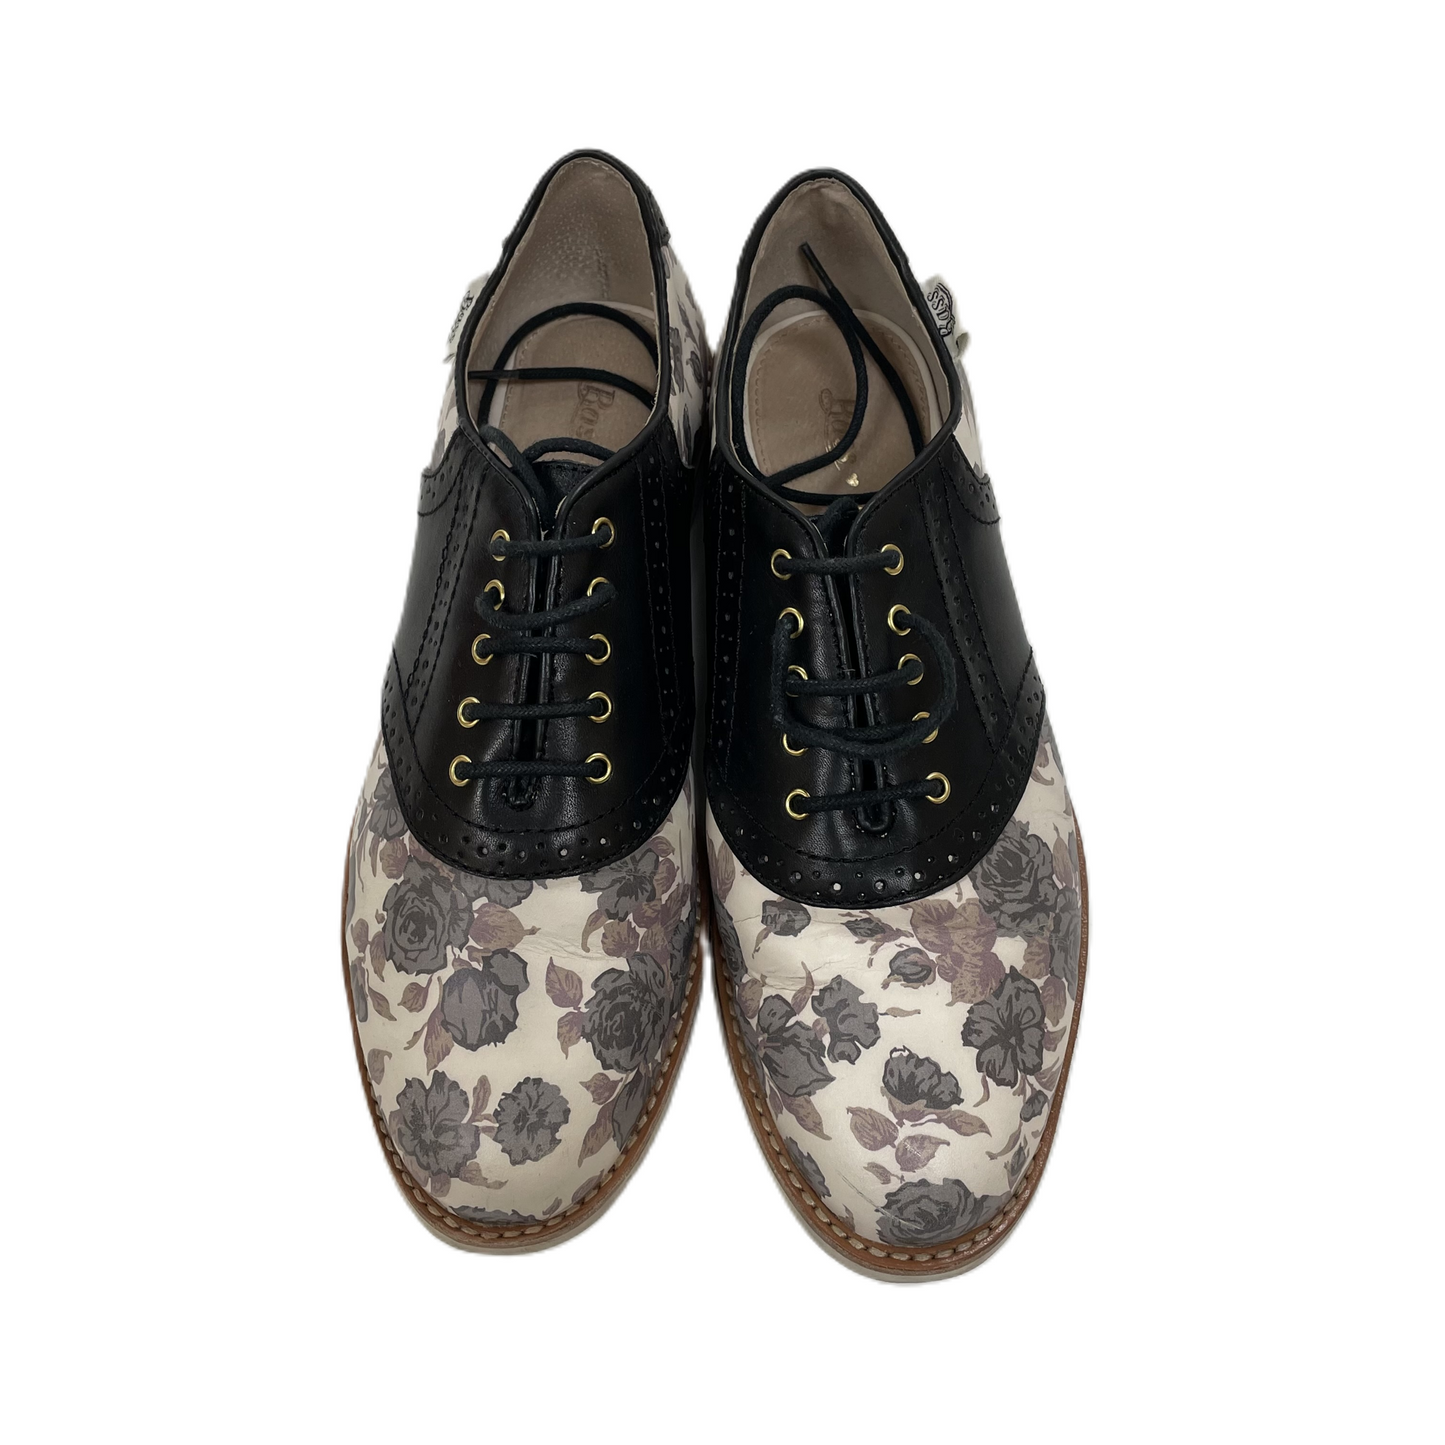 Floral Print Shoes Flats By Bass, Size: 8